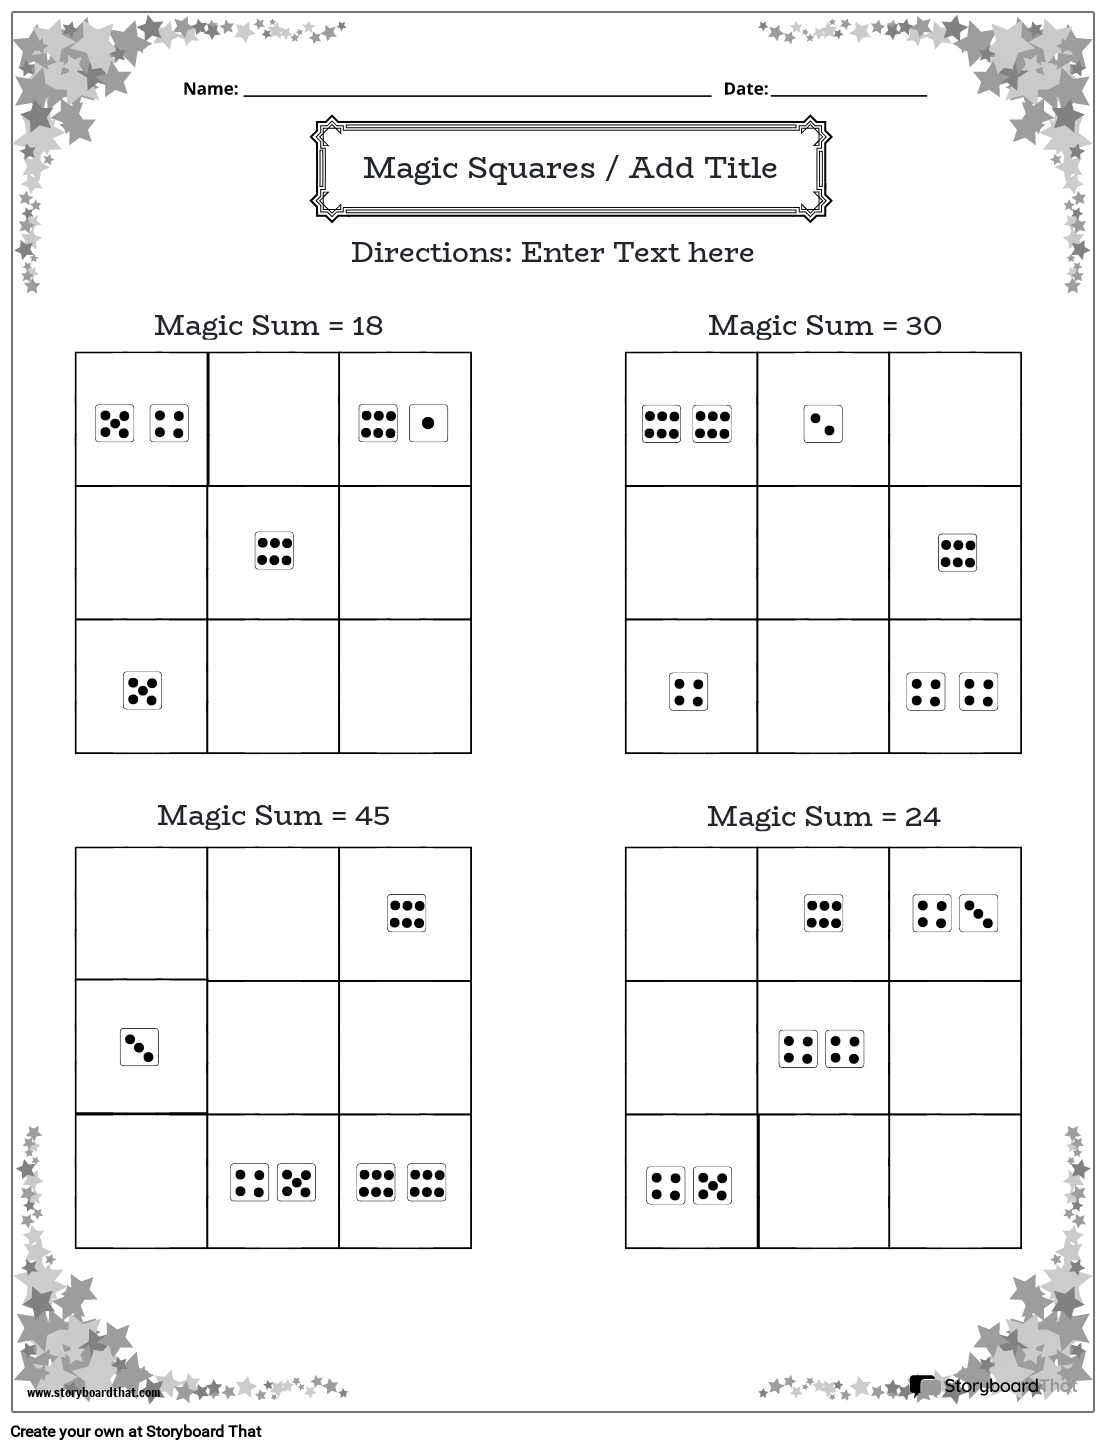 Dice Count Magic Squares Worksheet with Star Border (black and white)